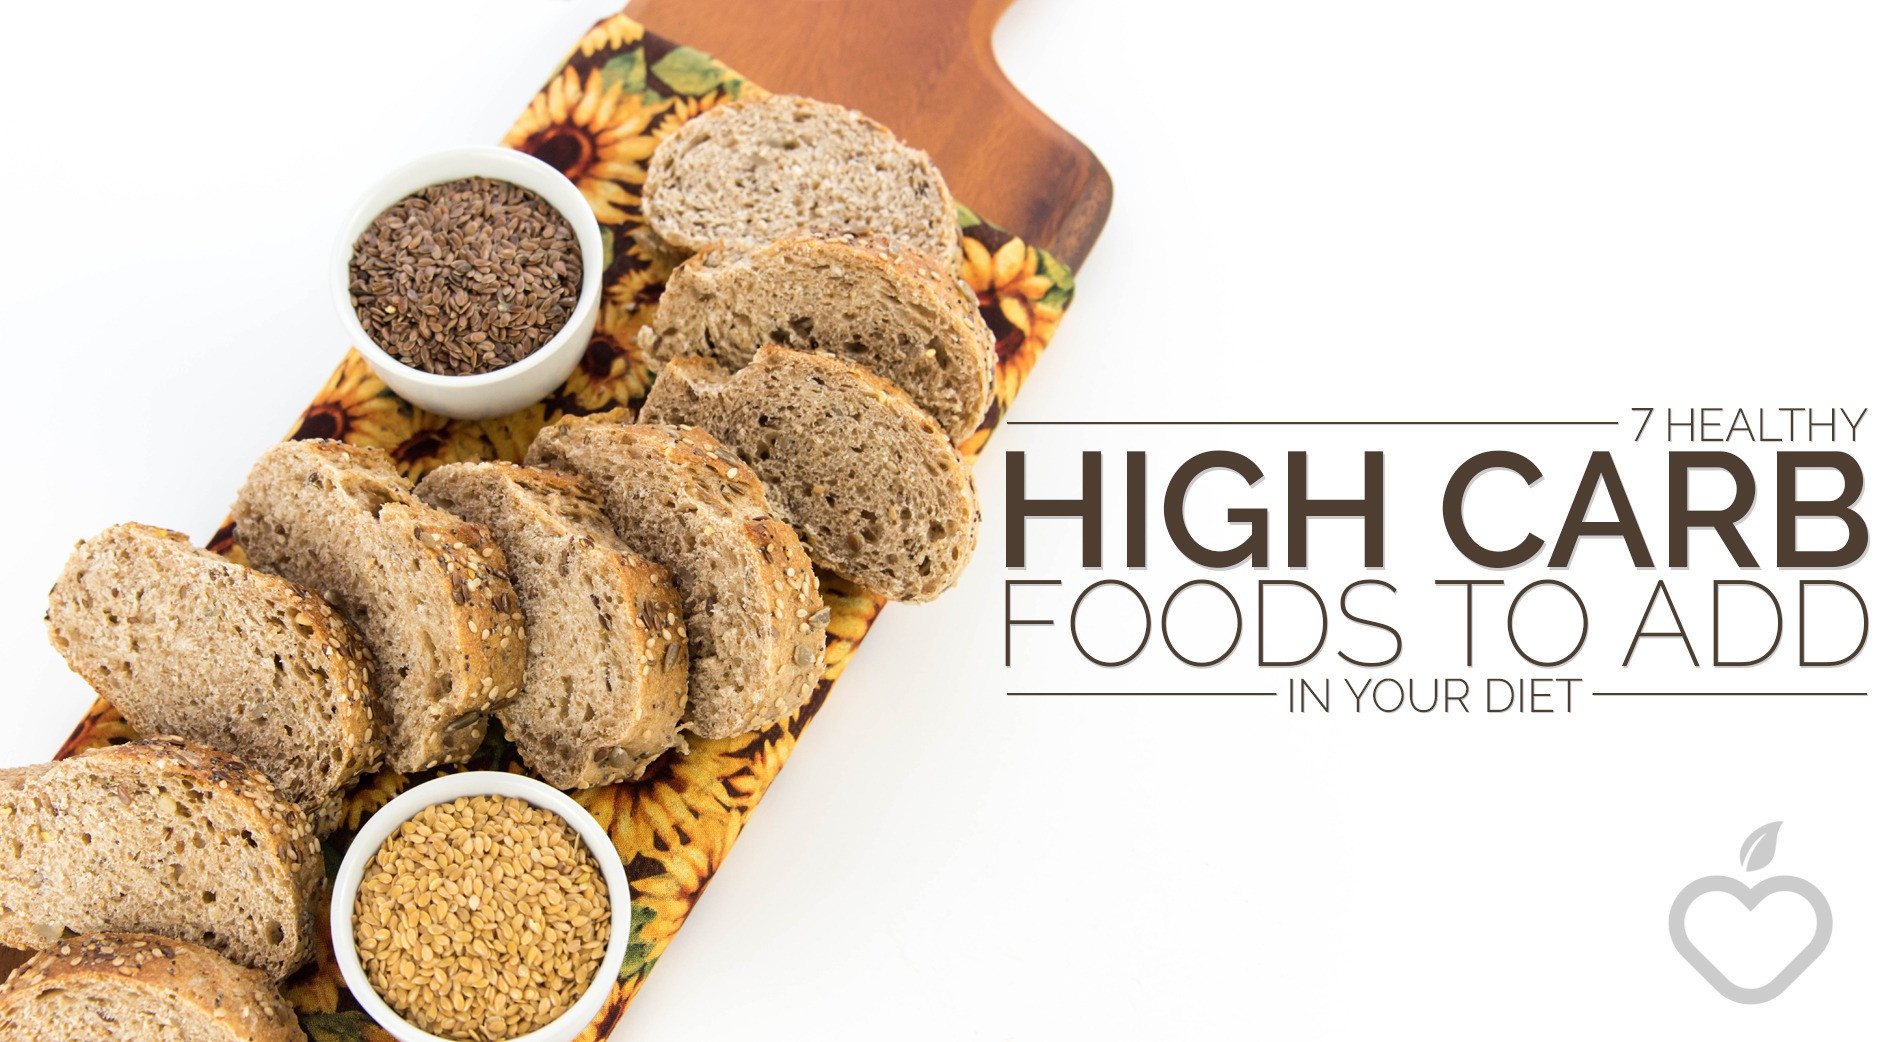 Healthy High Carb Snacks
 7 Healthy High Carb Foods To Add In Your Diet